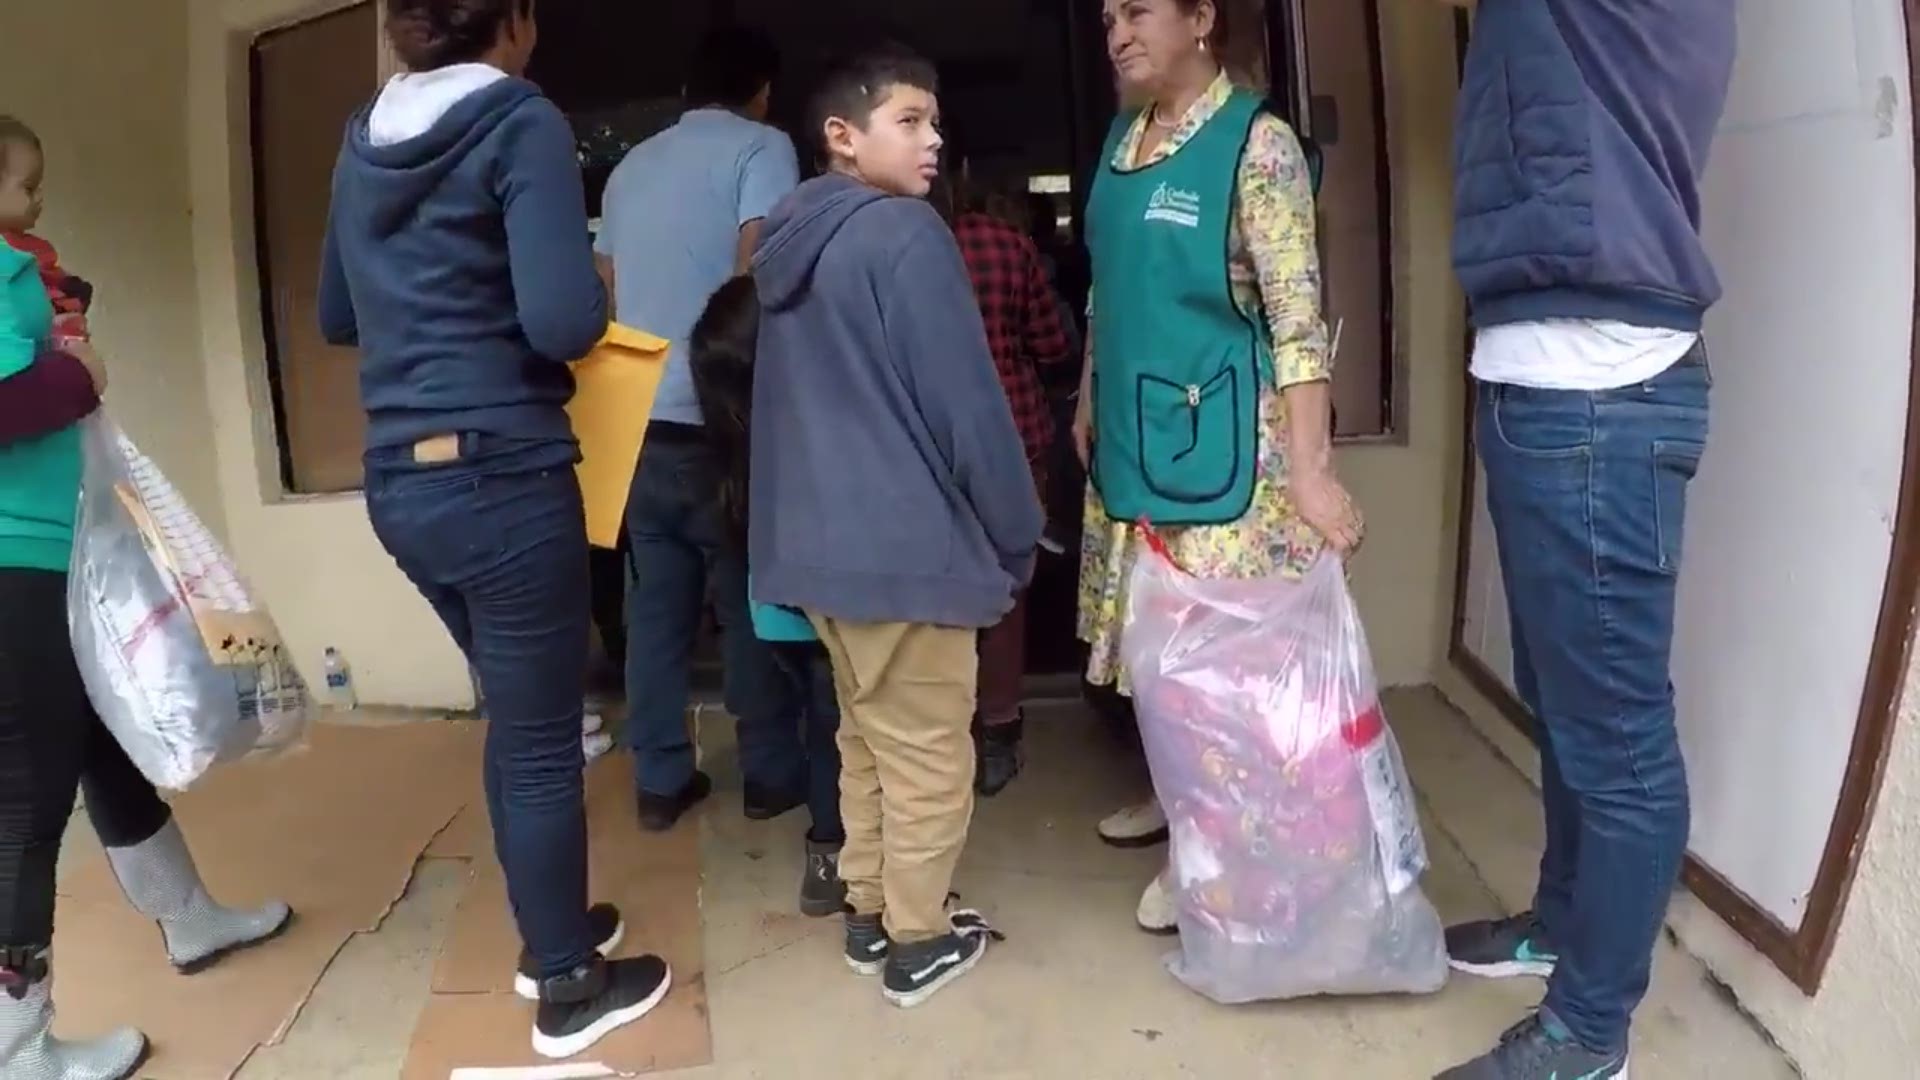 Guatemalan families arrive together at a Catholic Charities shelter in McAllen near the Texas border. Video: WFAA